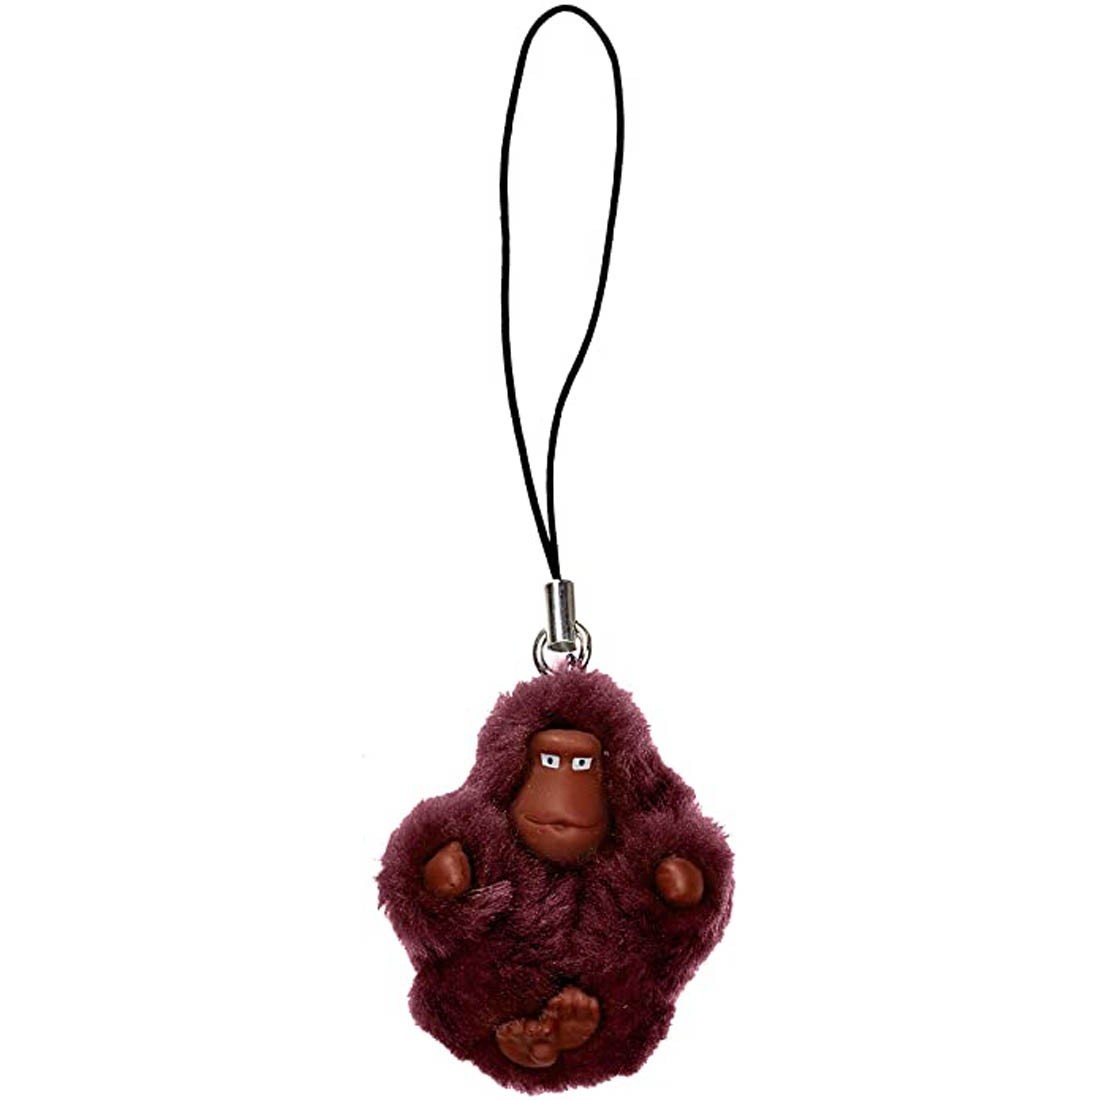 Buy Kipling Monkey Clip XS Pack- 10 Dark Plum - Kipling, delivered to your  home | TheOutfit